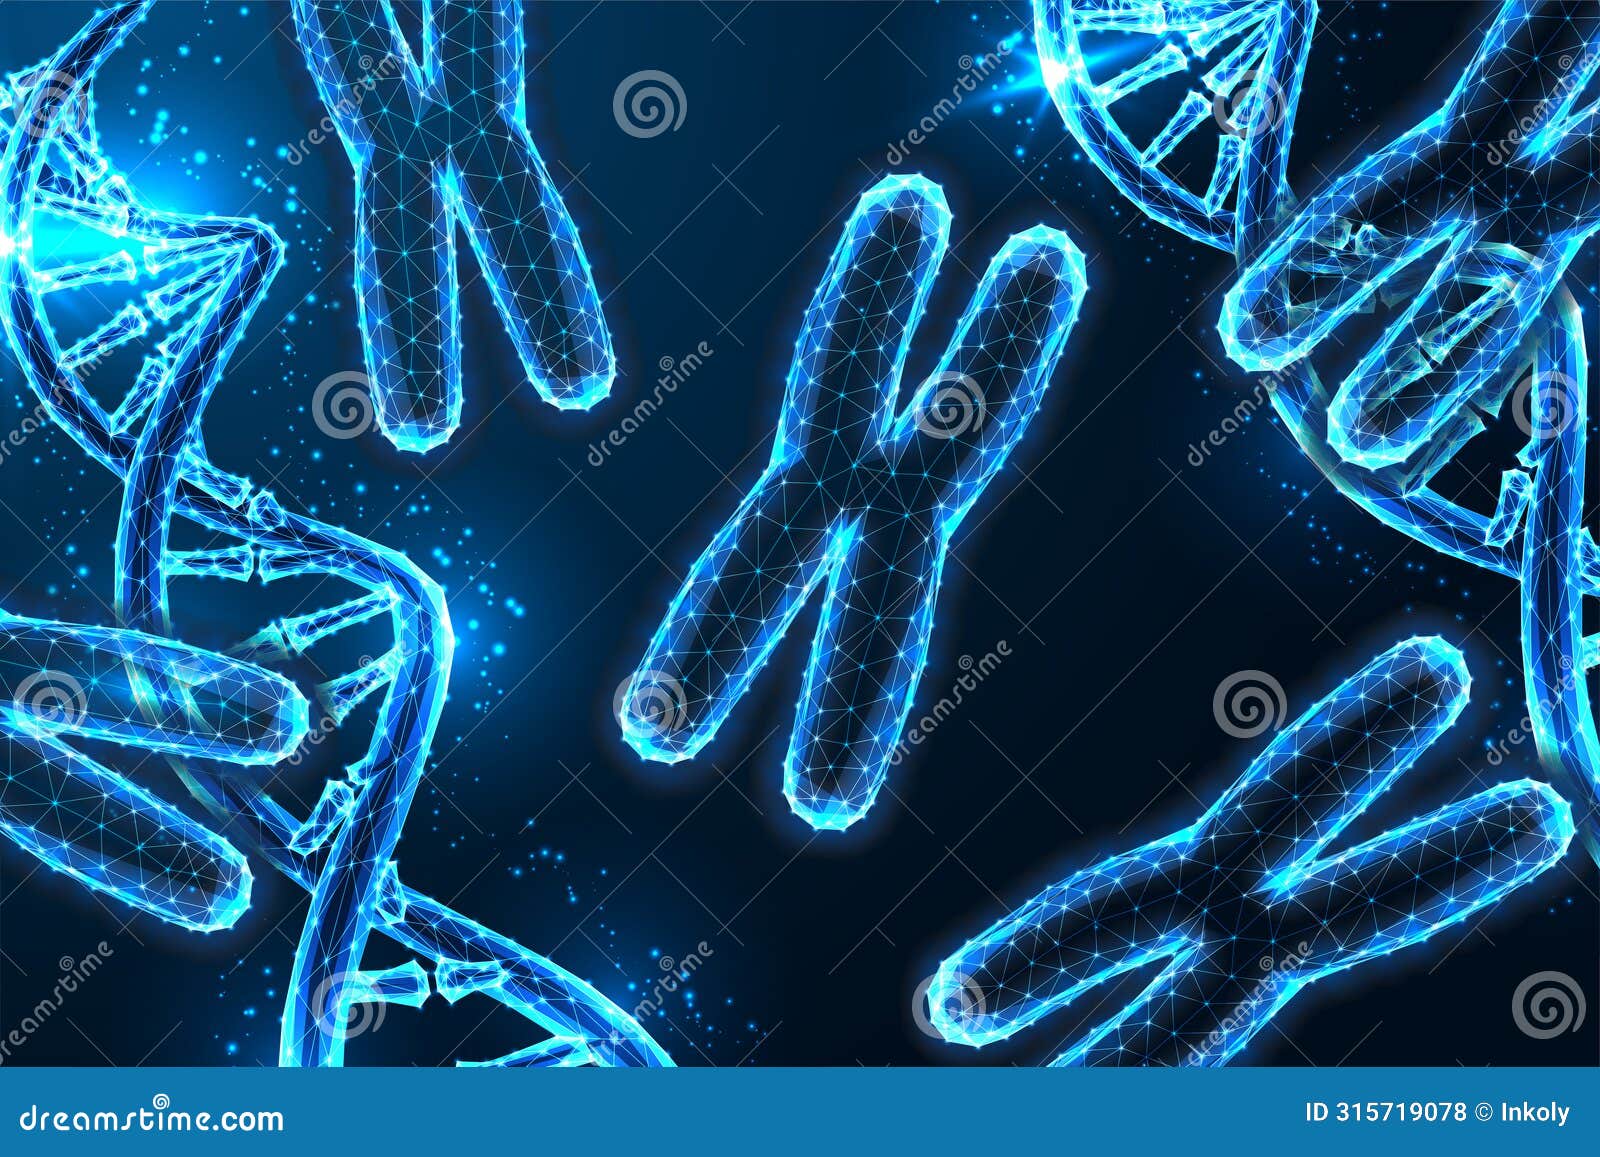 chromosomes and dna strands scientific background. genetic engineering futuristic concept